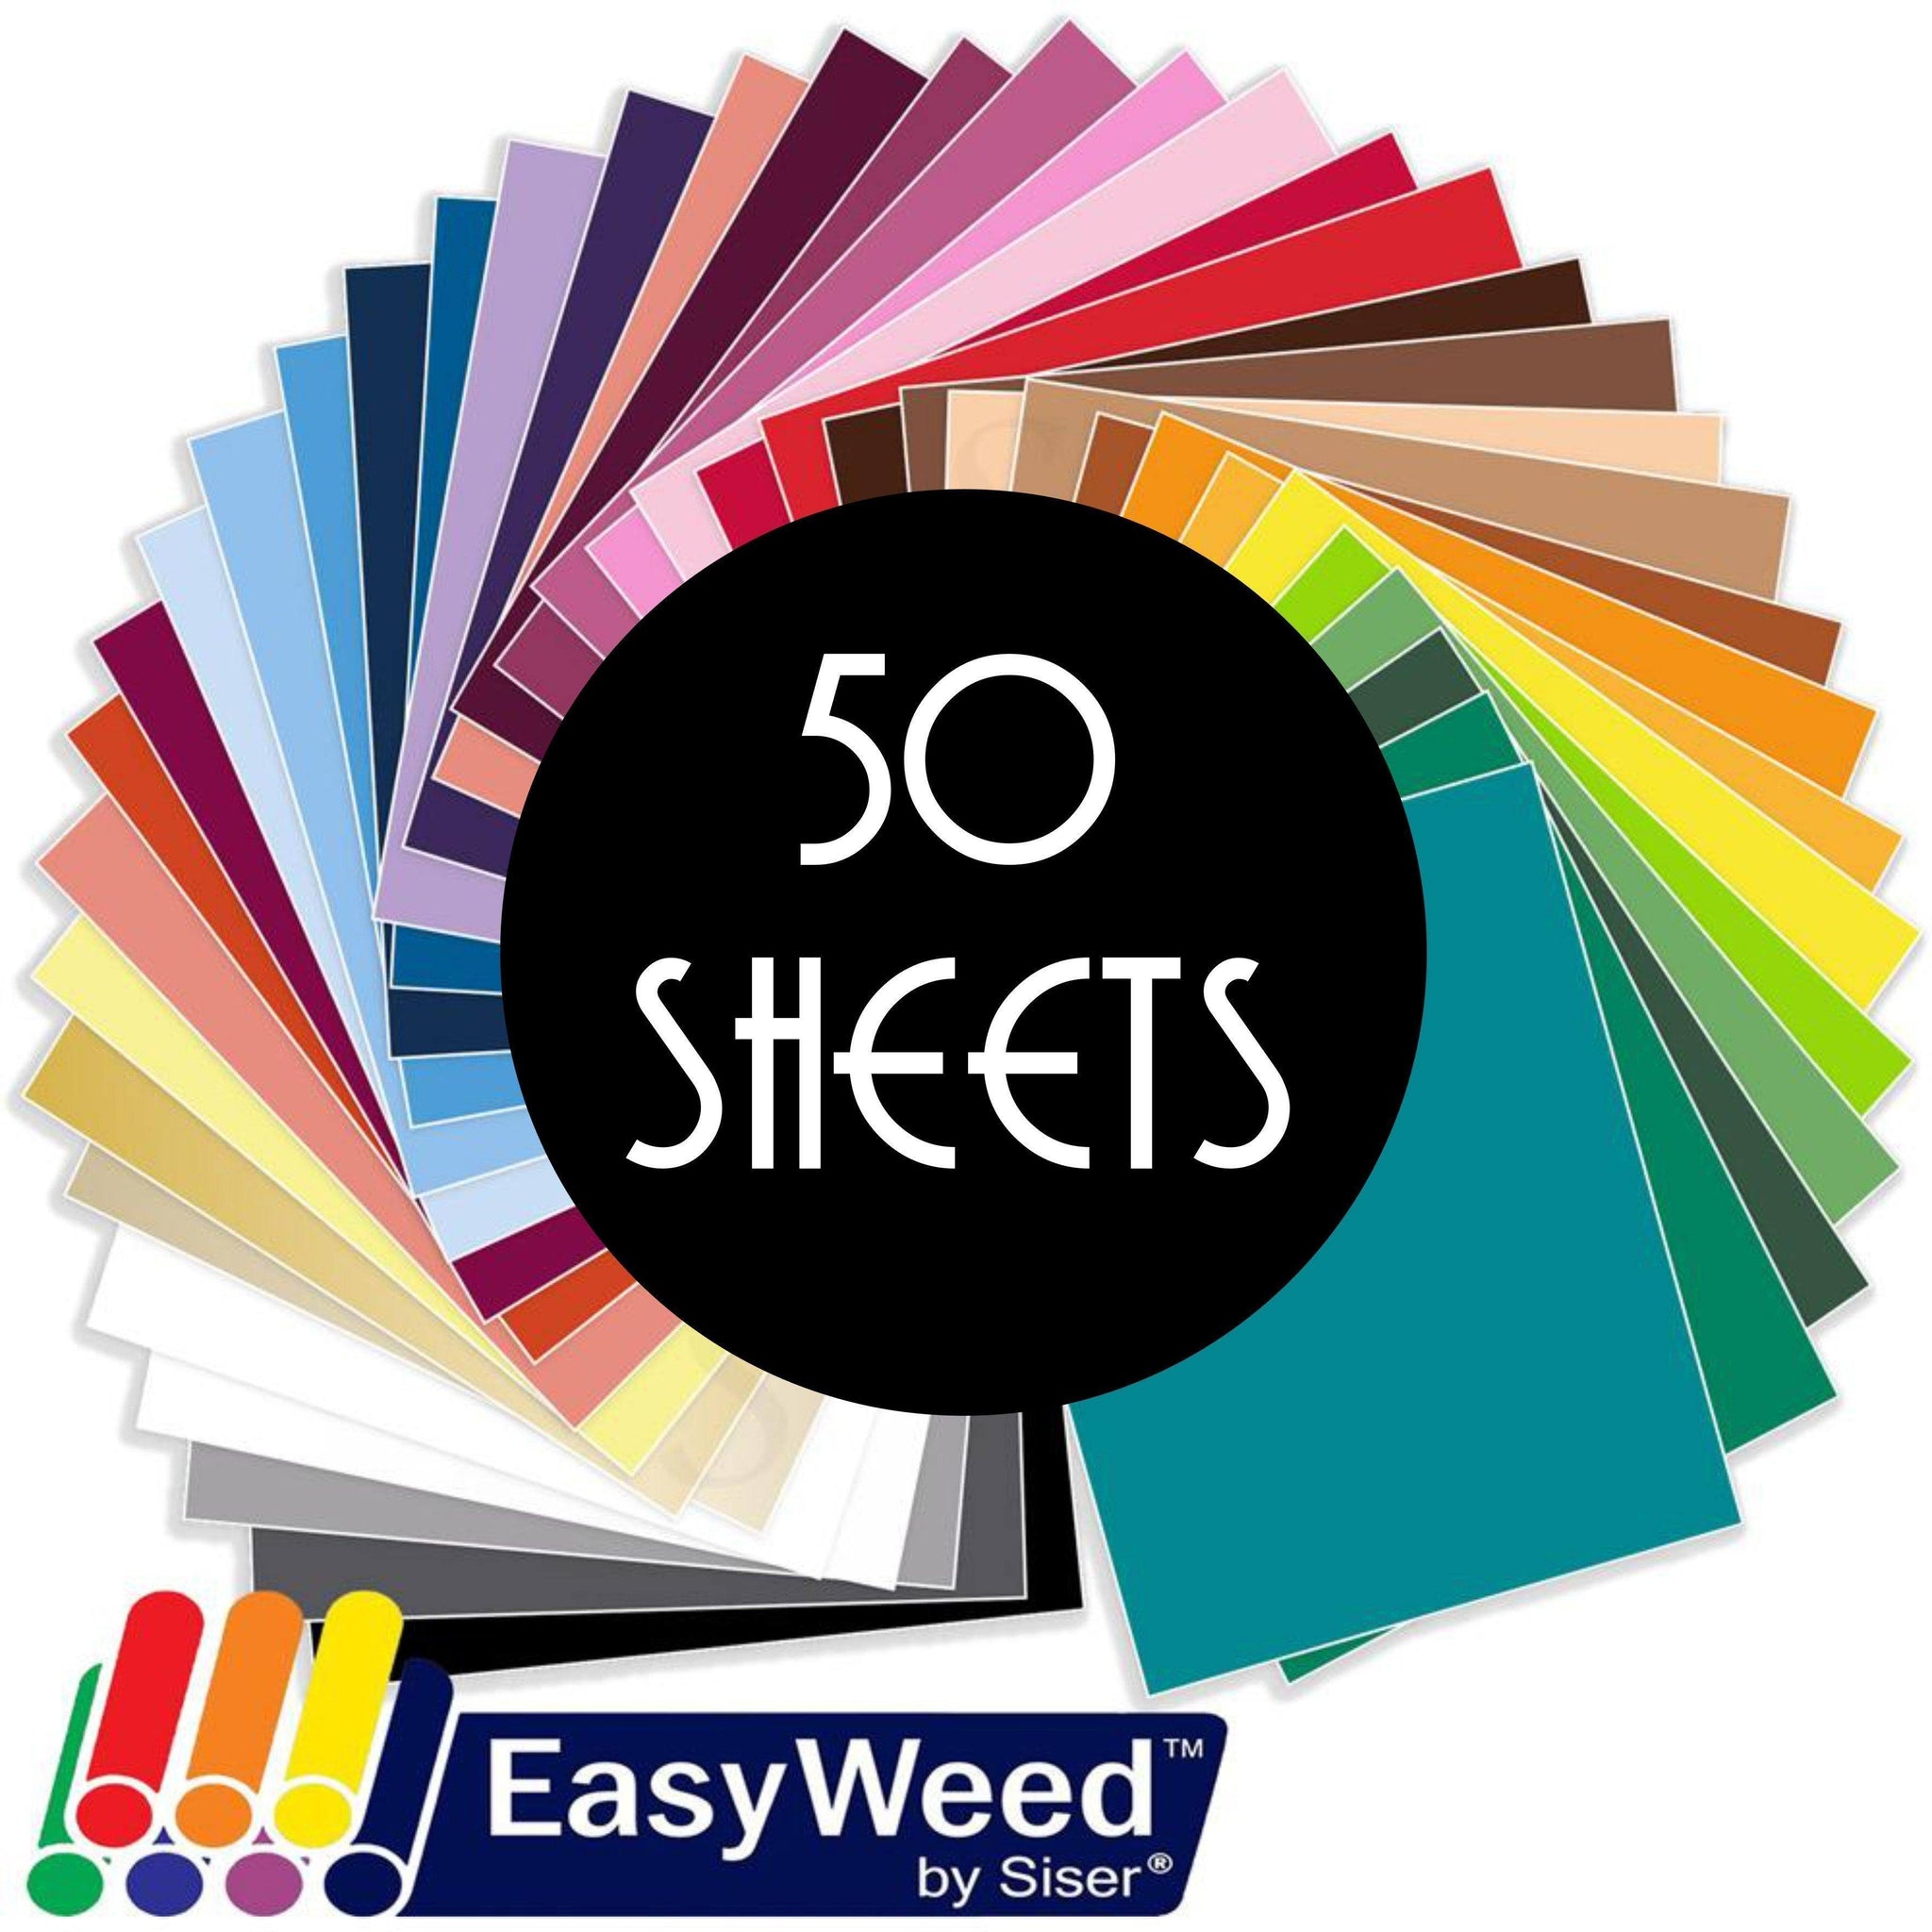 Siser Easyweed HTV 12x15 Sheets OVERSTOCK SALE Limited Quantities –